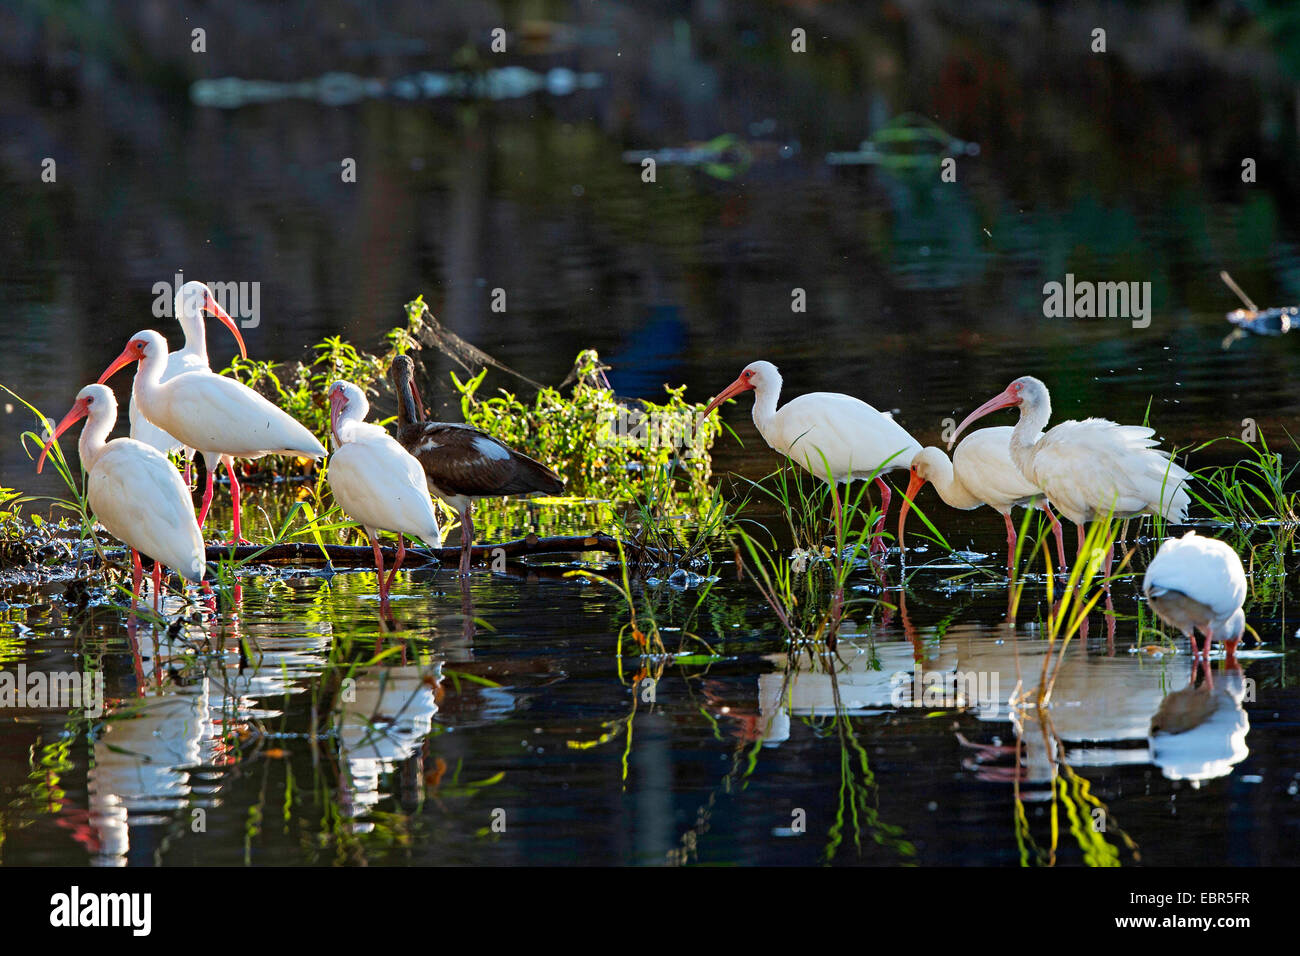 white ibis (Eudocimus albus), searching food in shallow water, Costa Rica, Jaco Stock Photo